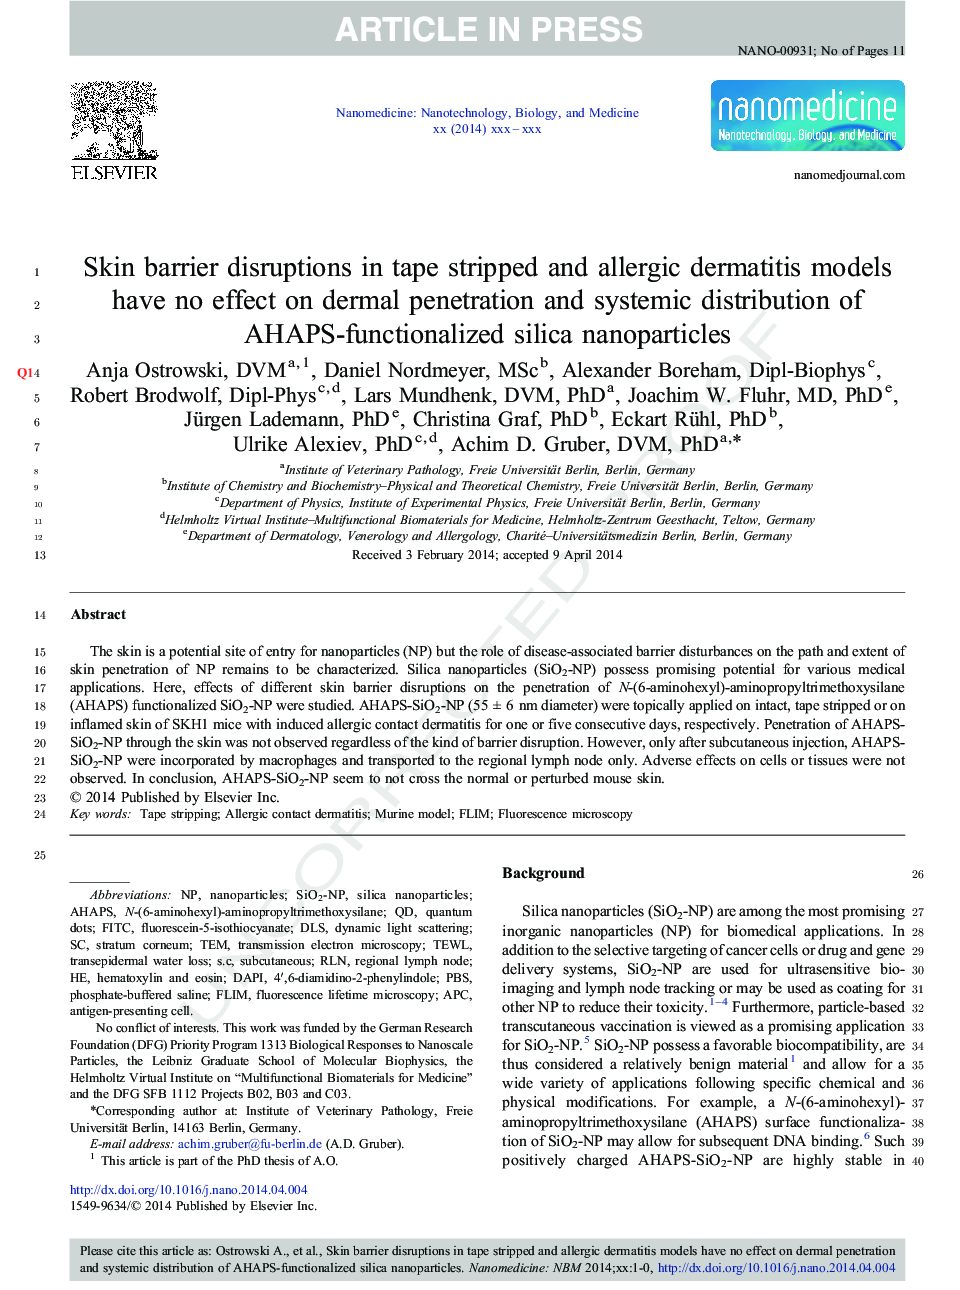 Skin barrier disruptions in tape stripped and allergic dermatitis models have no effect on dermal penetration and systemic distribution of AHAPS-functionalized silica nanoparticles